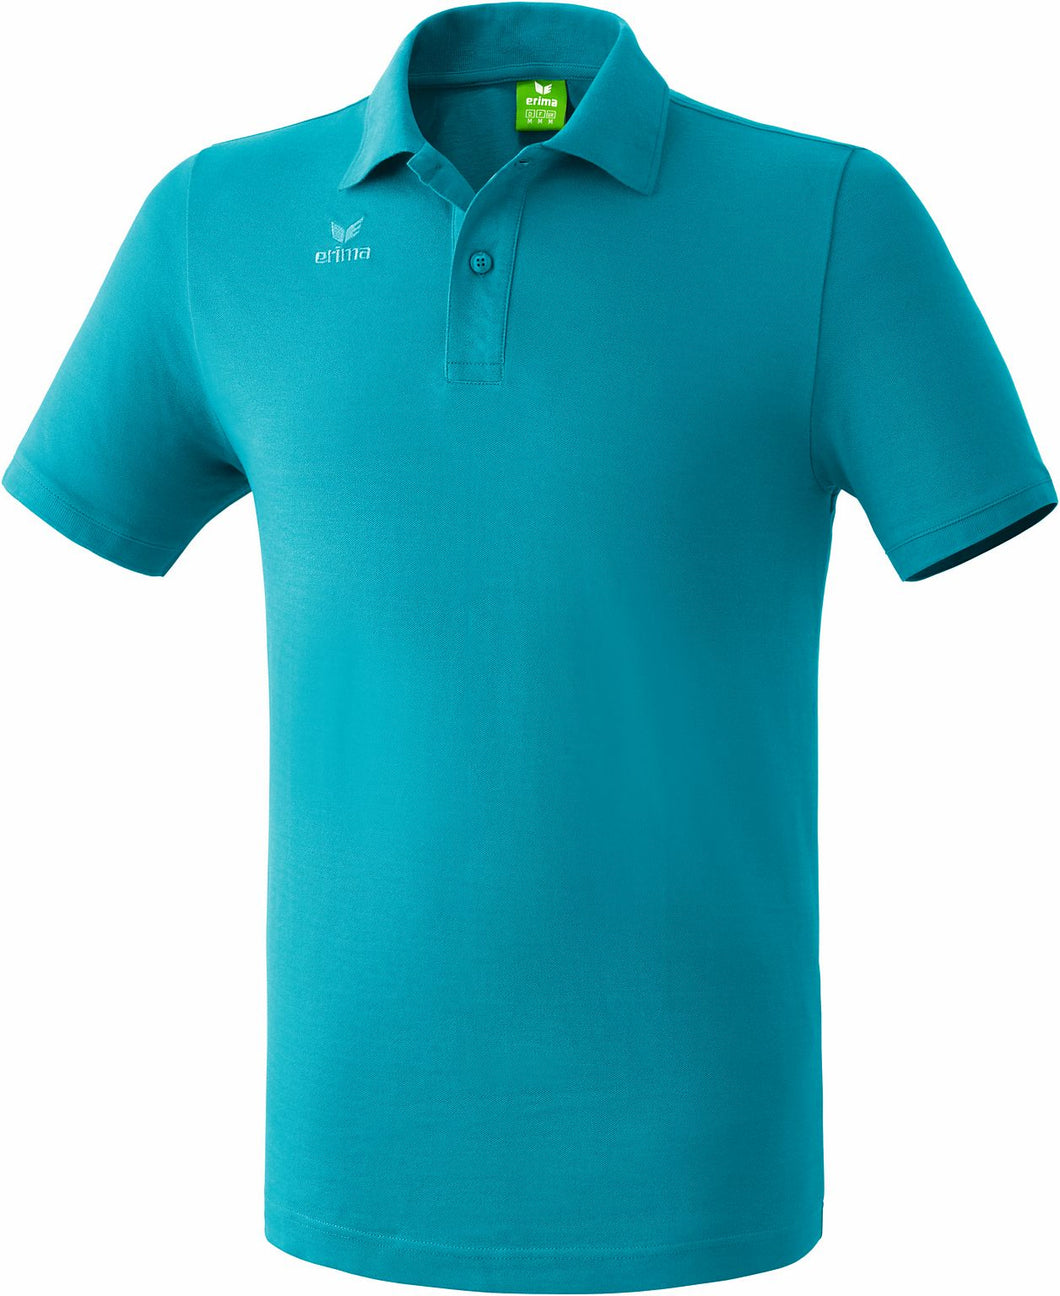 polo teampsort homme curaçao